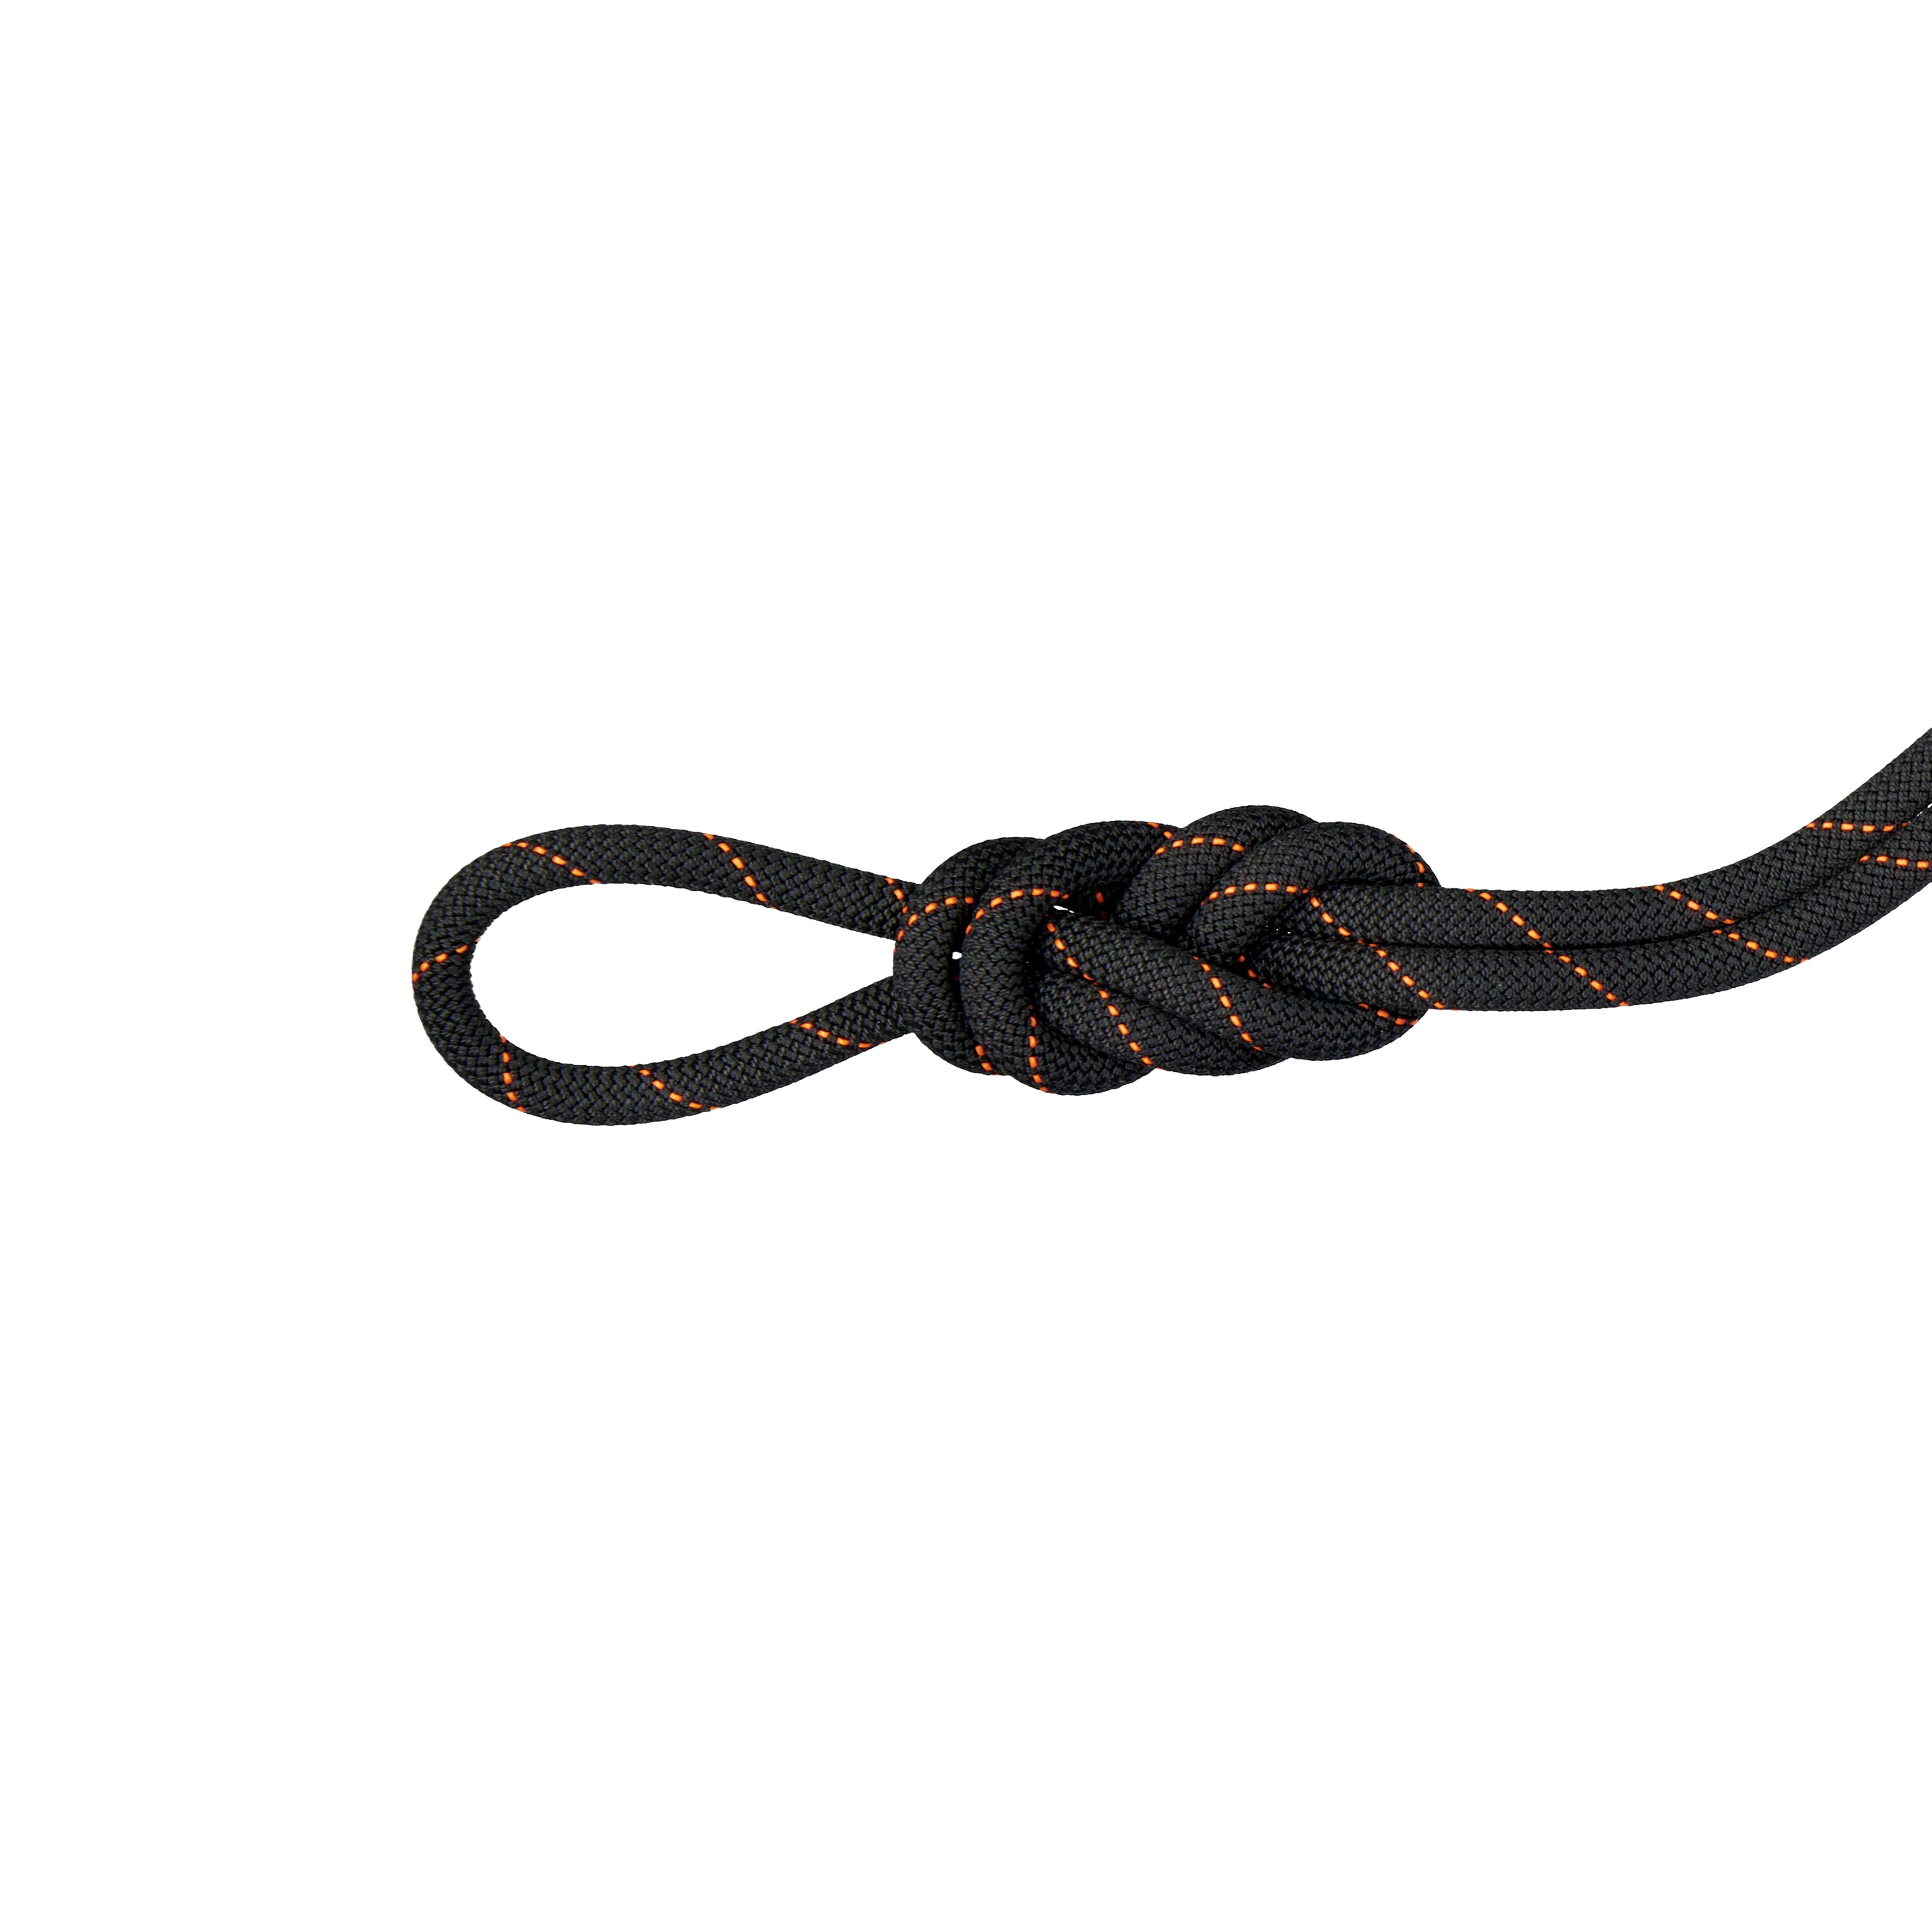 9.9 Gym Workhorse Dry Rope image